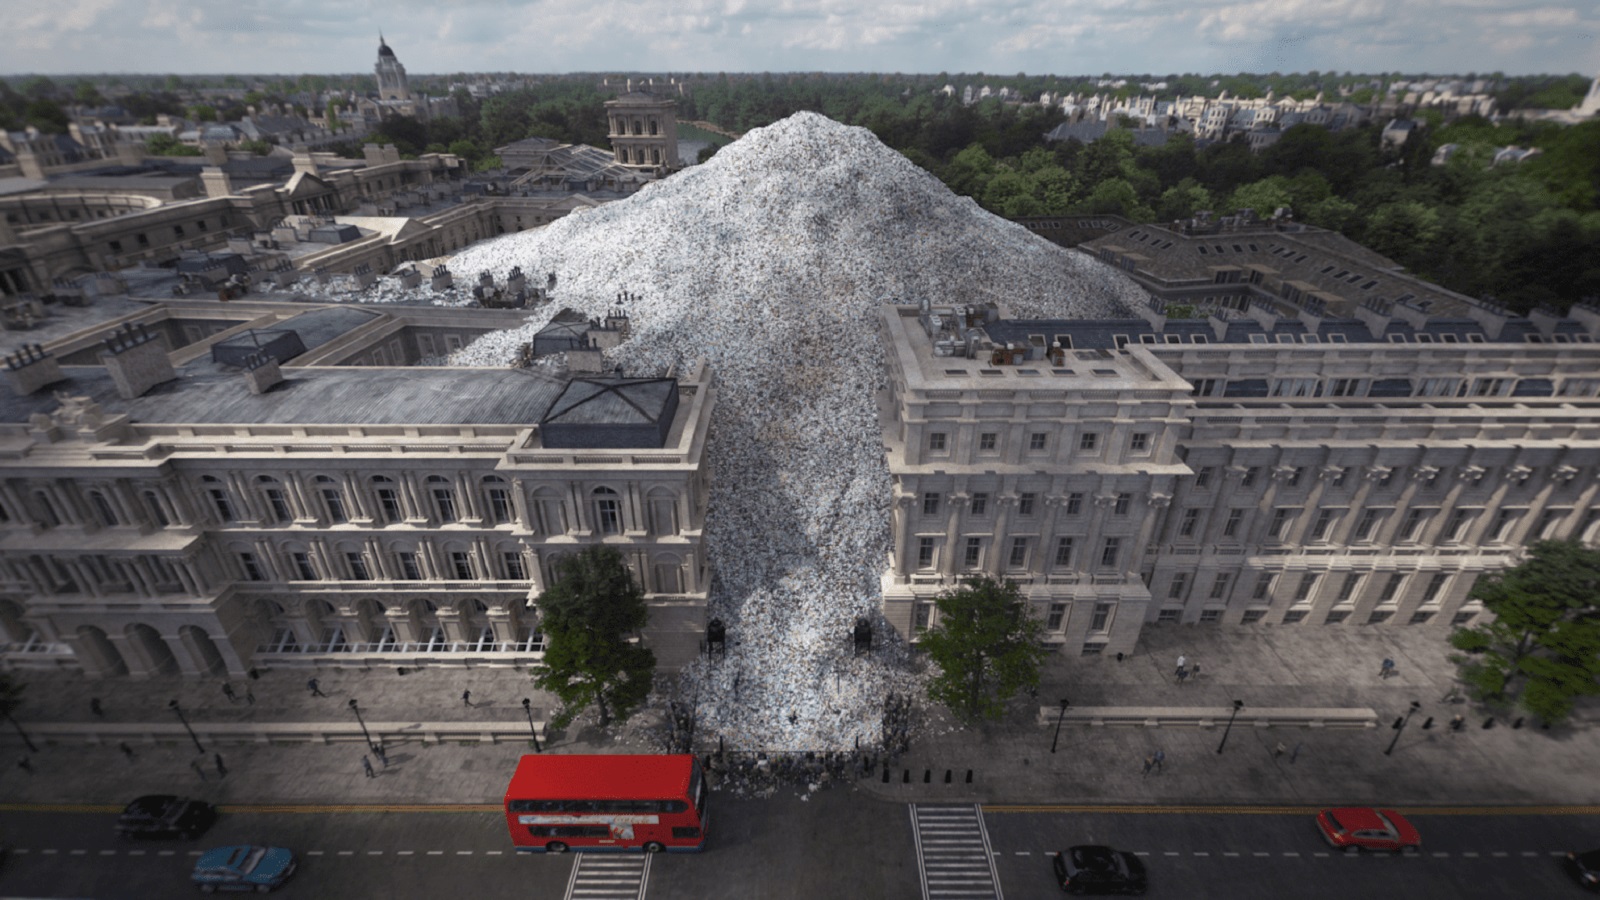 A Huge Pile of Plastic Waste Ends up on Downing Street